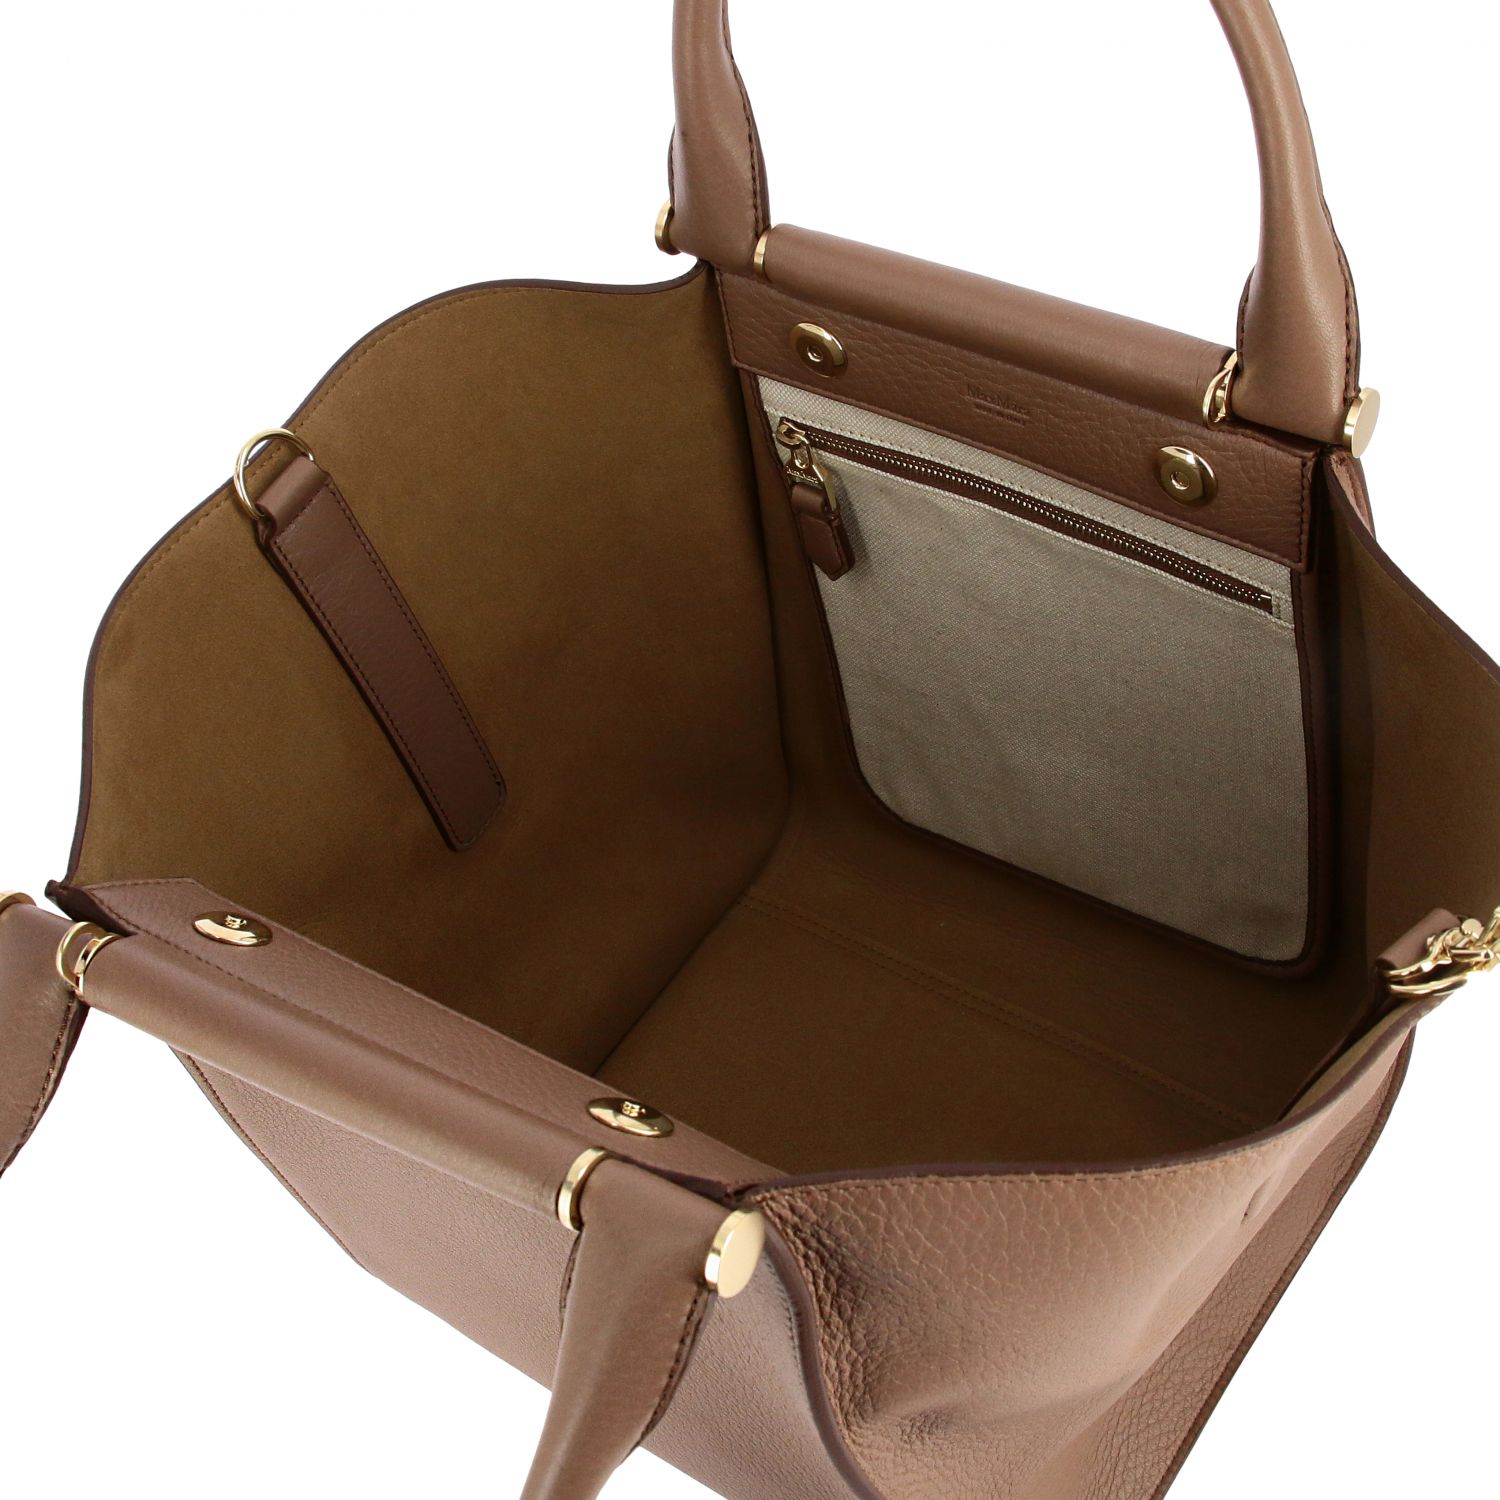 Max Mara Outlet: bag in genuine leather with shoulder strap | Crossbody ...